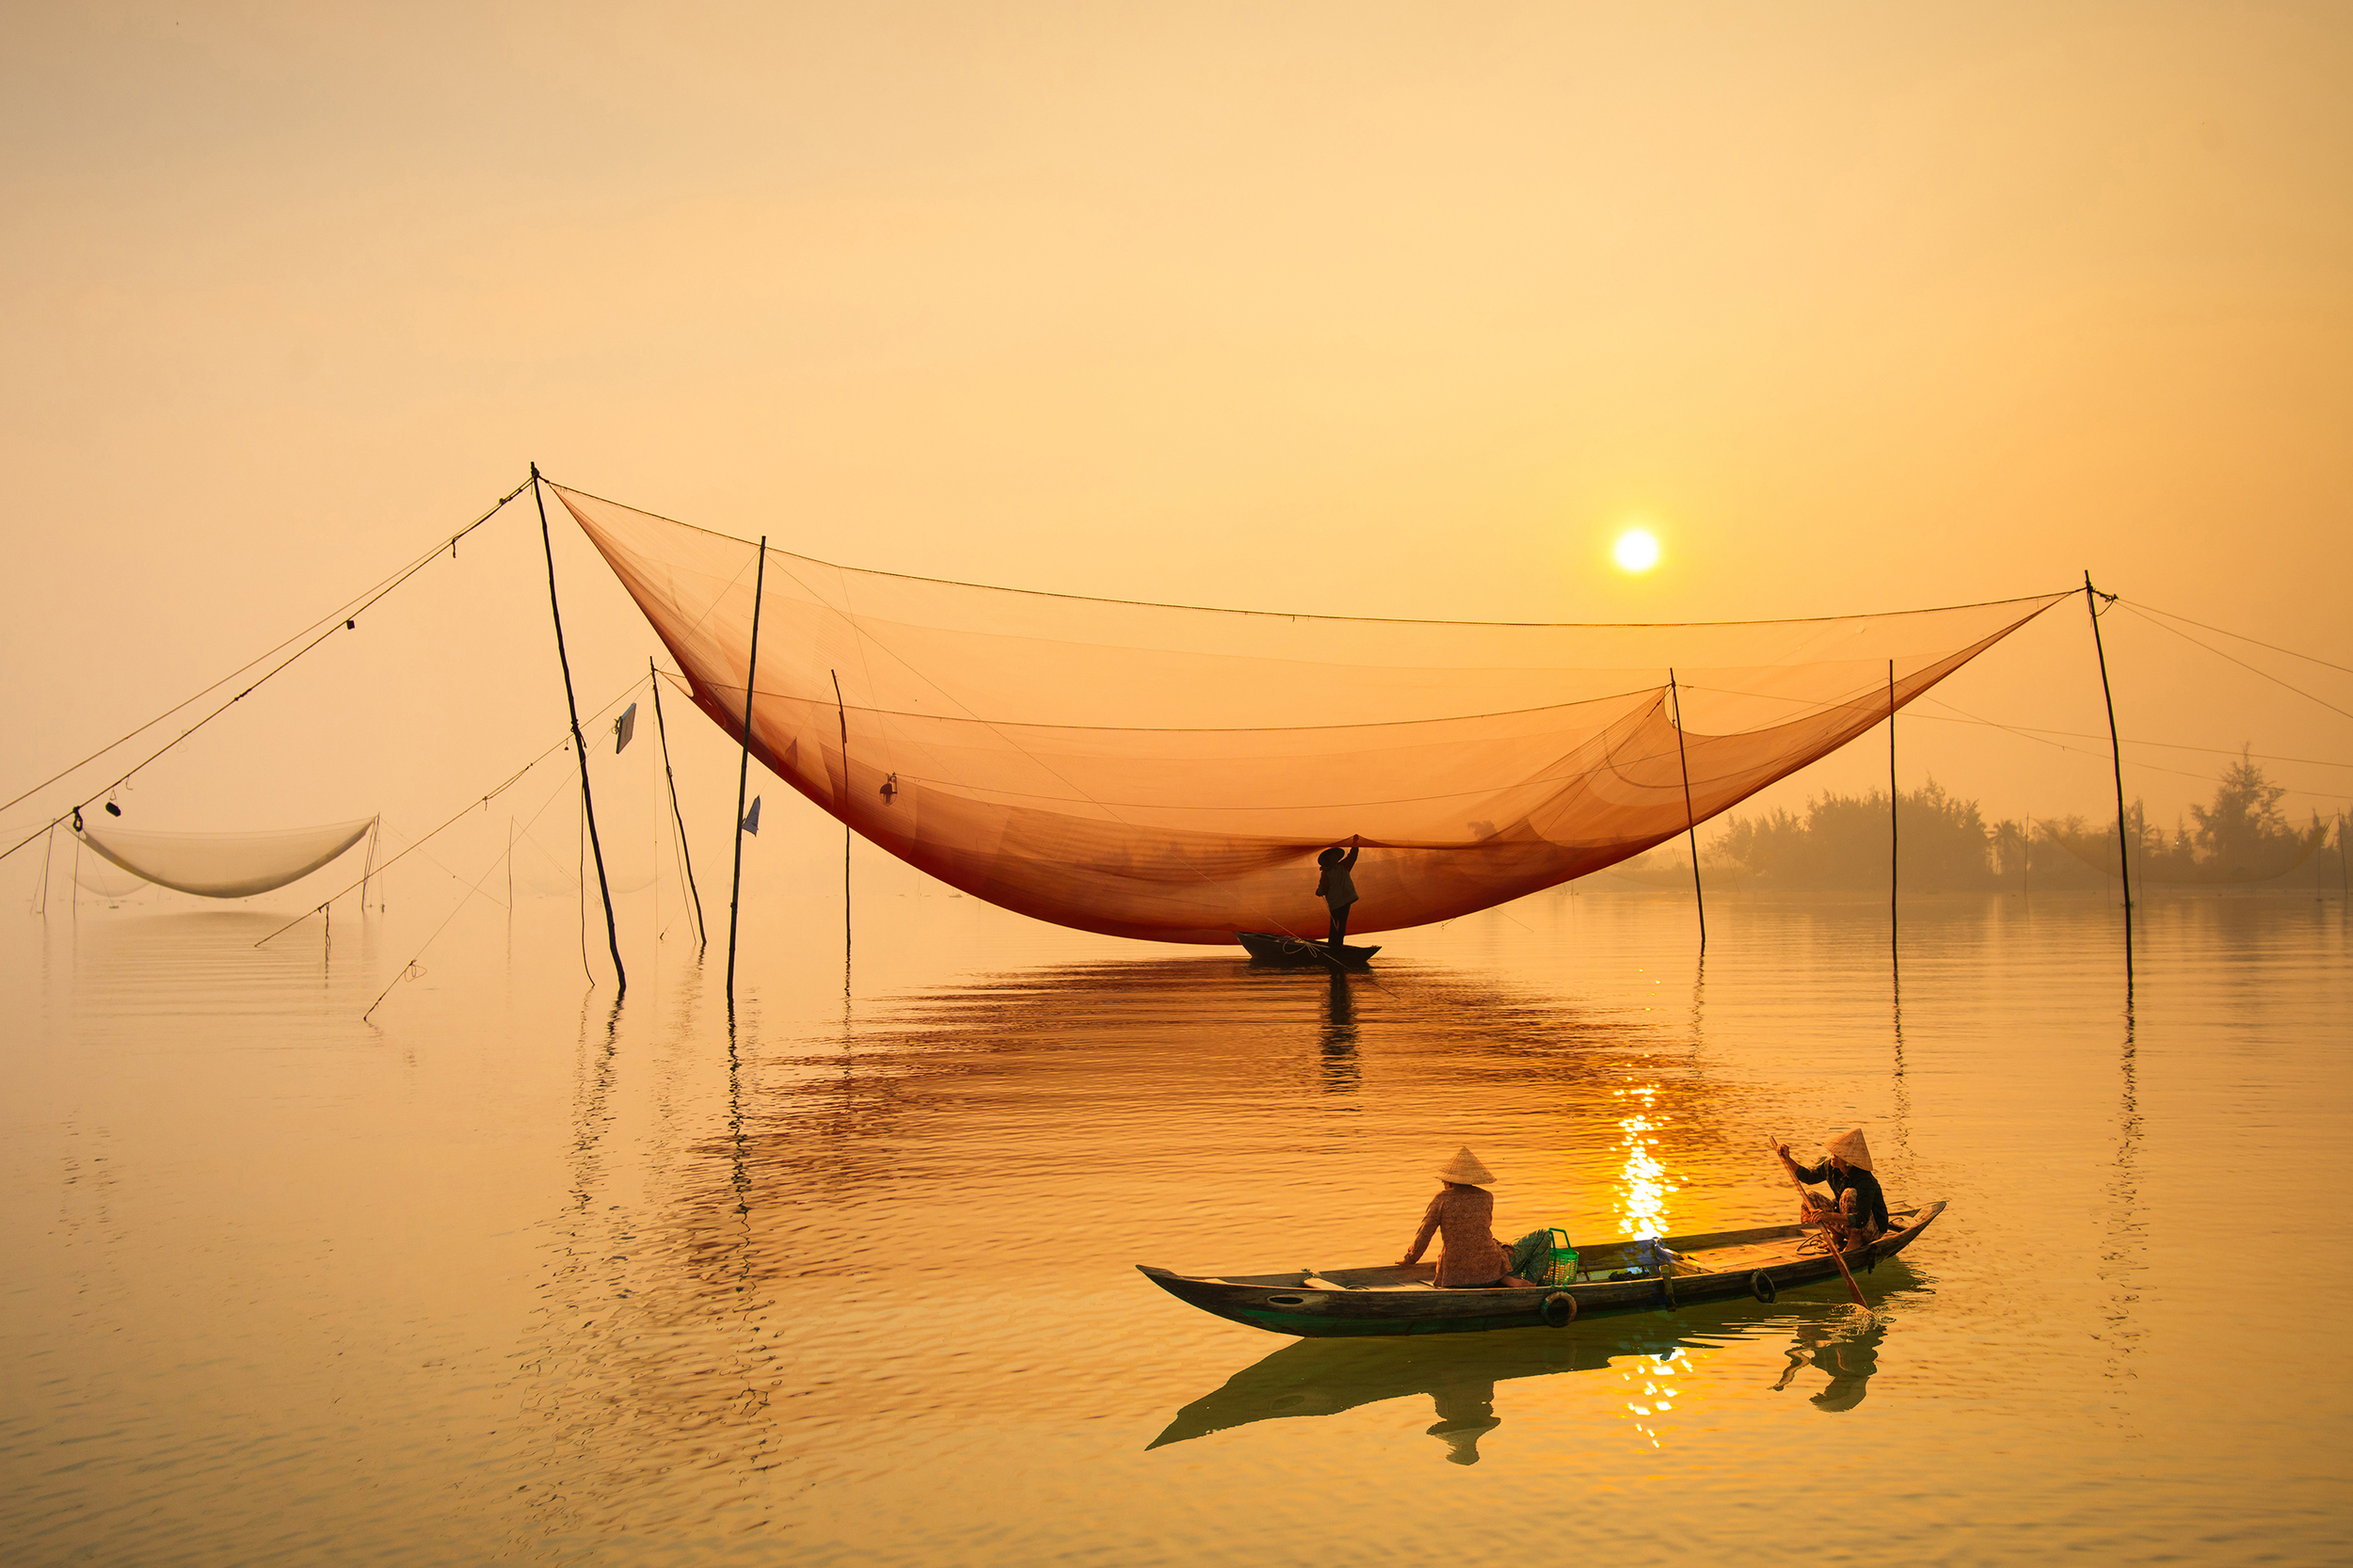 Two local people fishing from a canoe at sunset